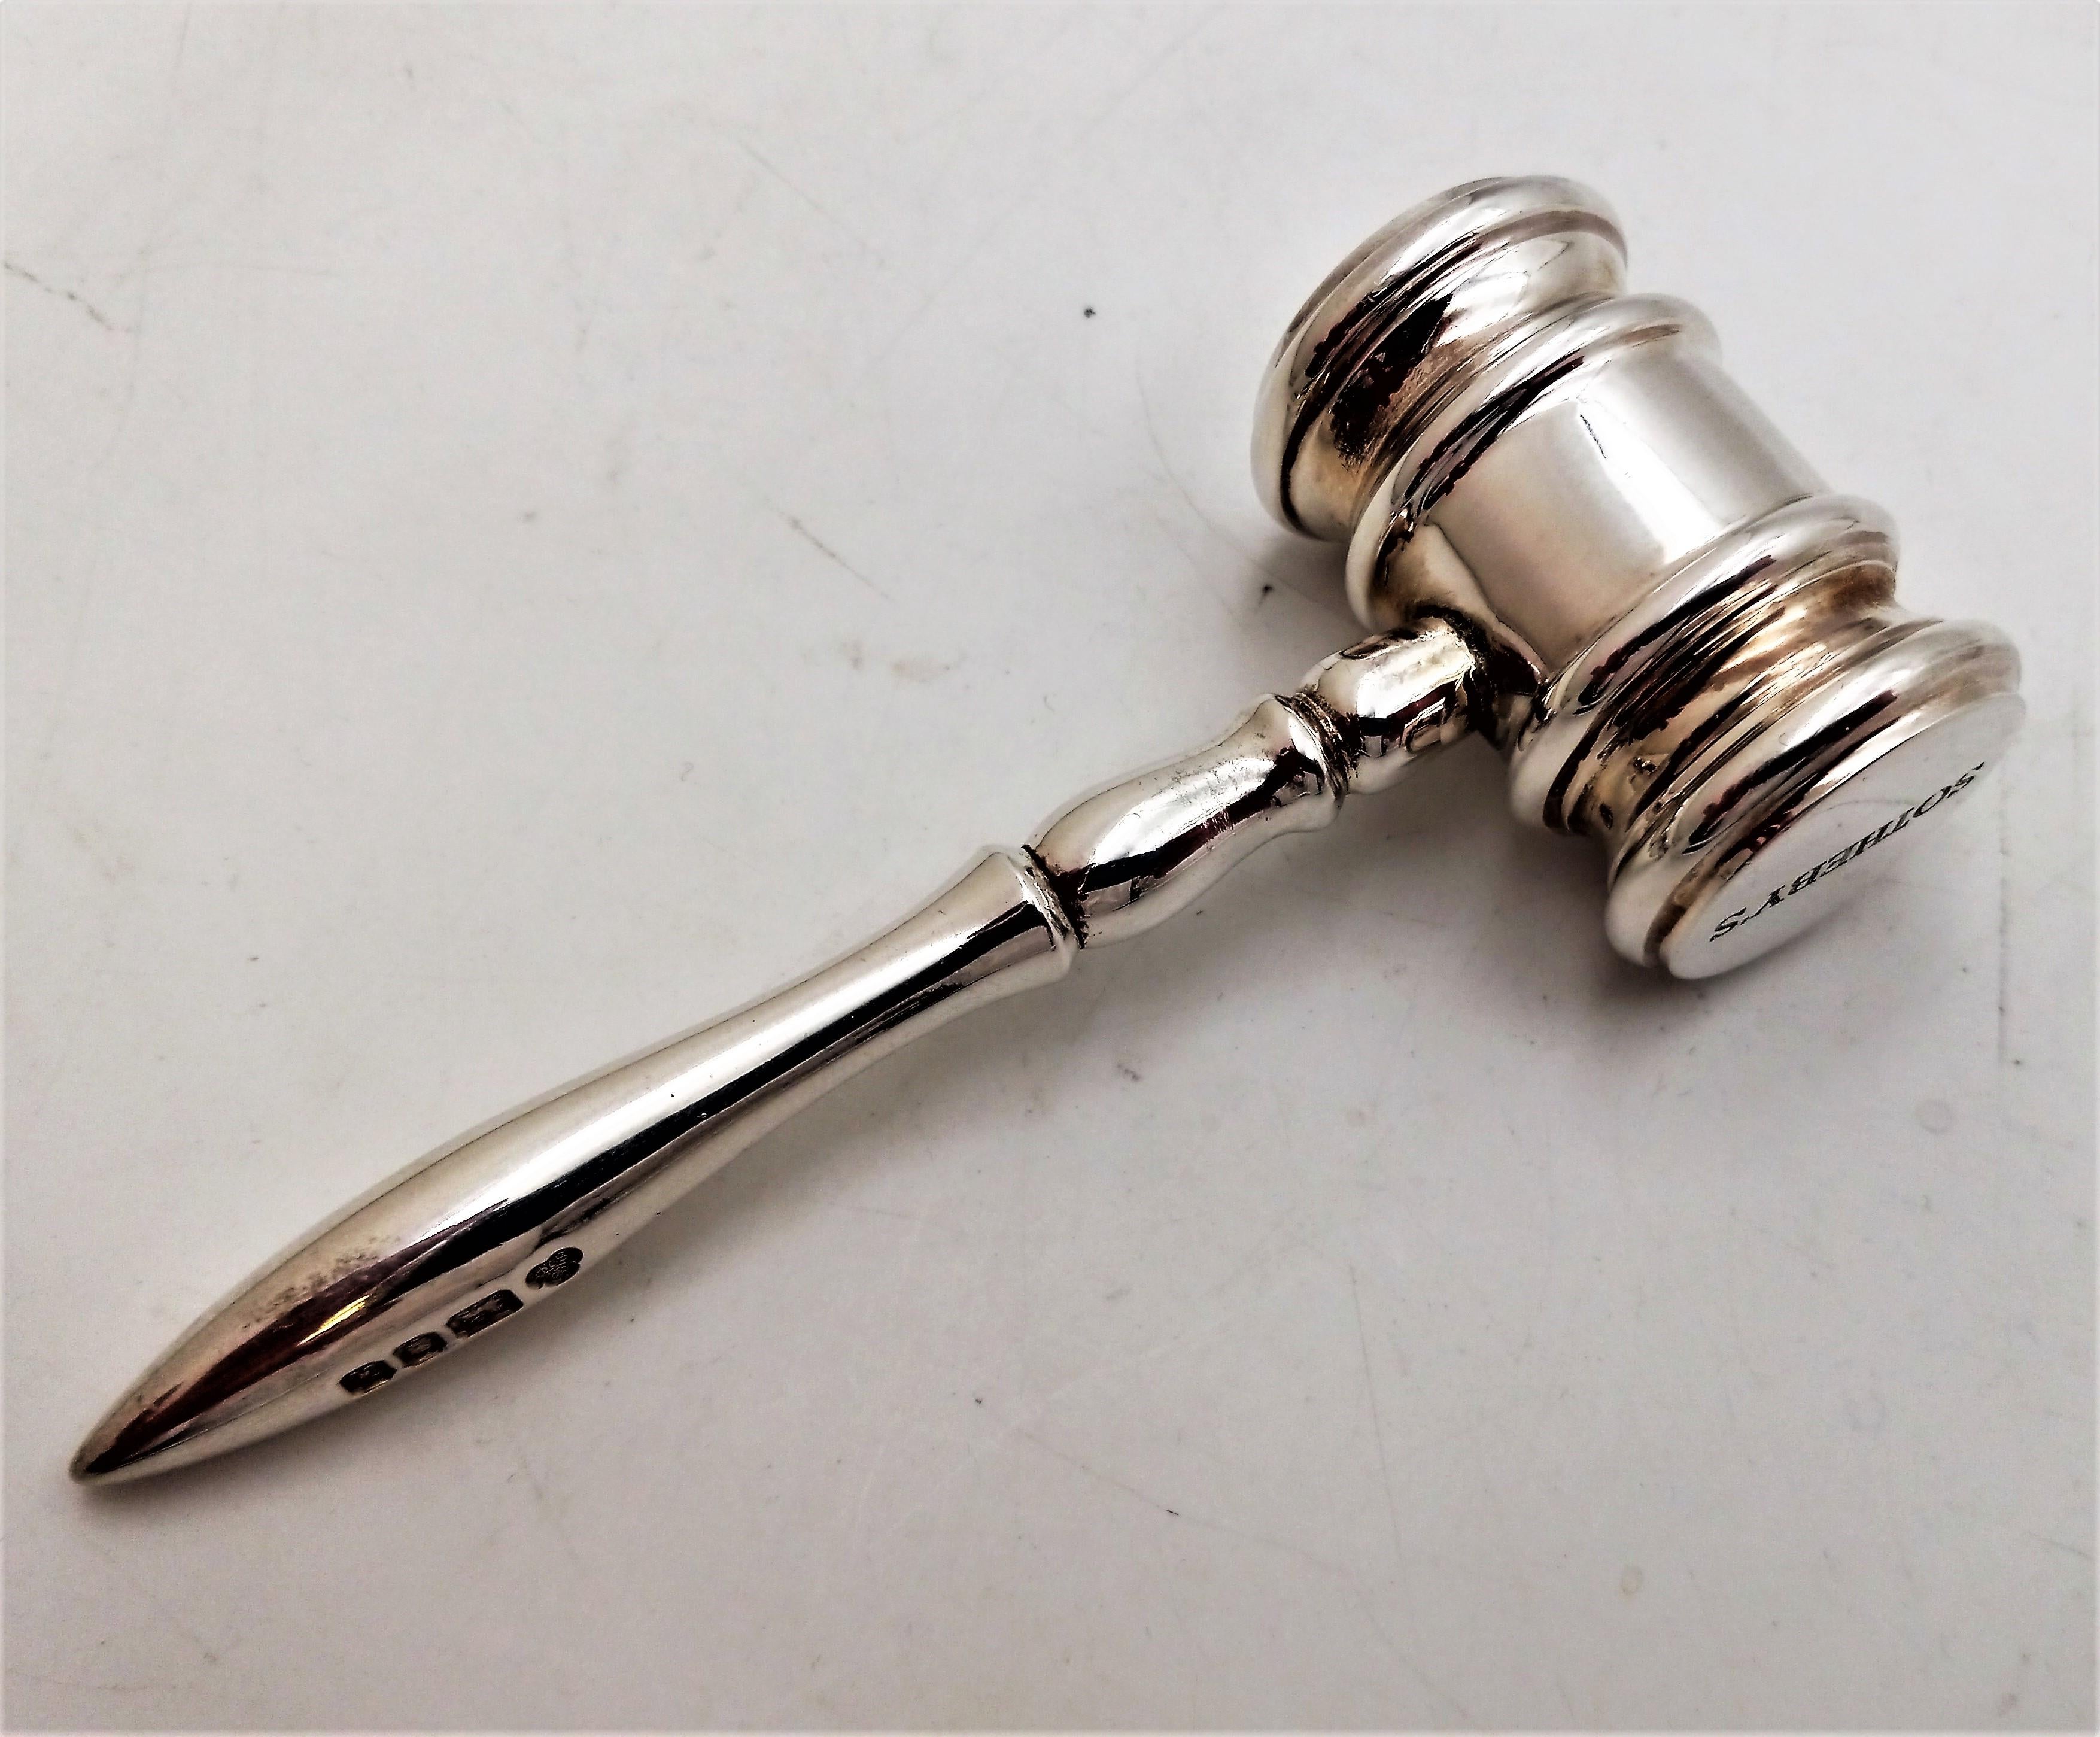 Silver Gavel -- Sotheby's Commemorative 250th Anniversary Collectible with 